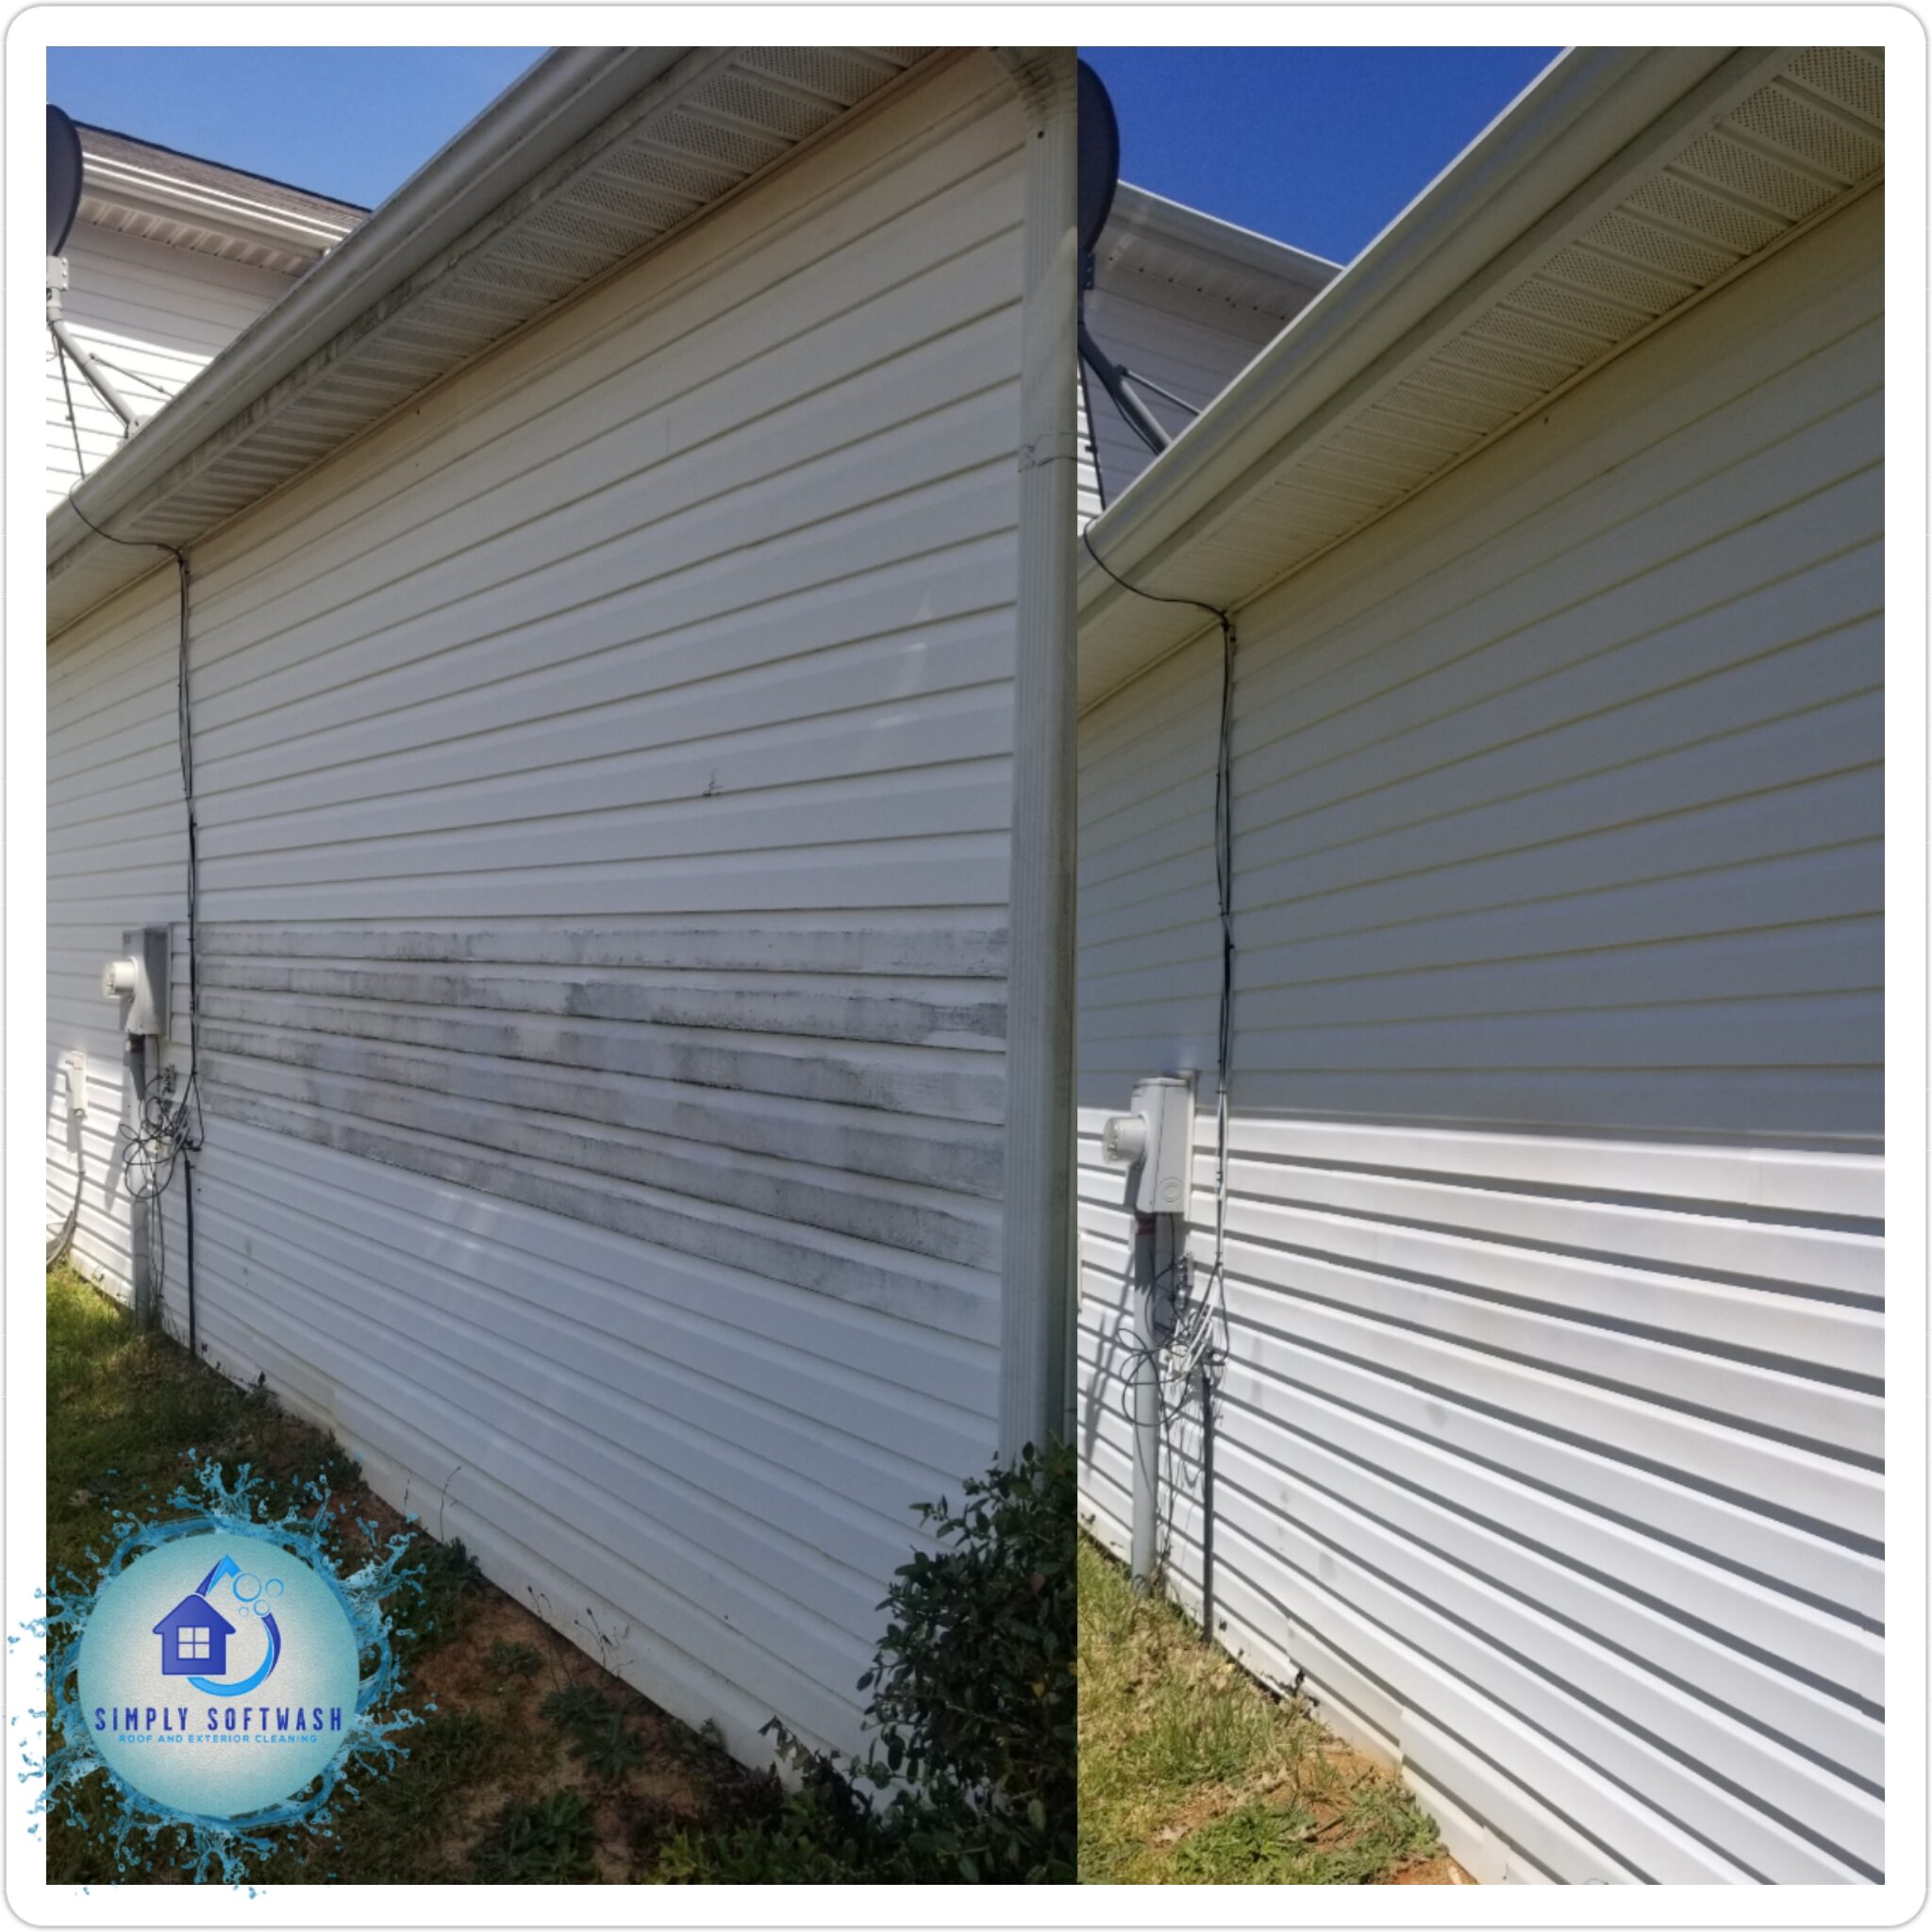 Our residential soft wash house washing service provides homeowners in Lancaster, SC, and the surrounding areas with professional soft washing solutions that won't break the bank. The team here at Simply Softwash Roof and Exterior Cleaning will use a safe and eco-friendly soft washing formula to clean the exteriors of your home, including walls, siding, and more.